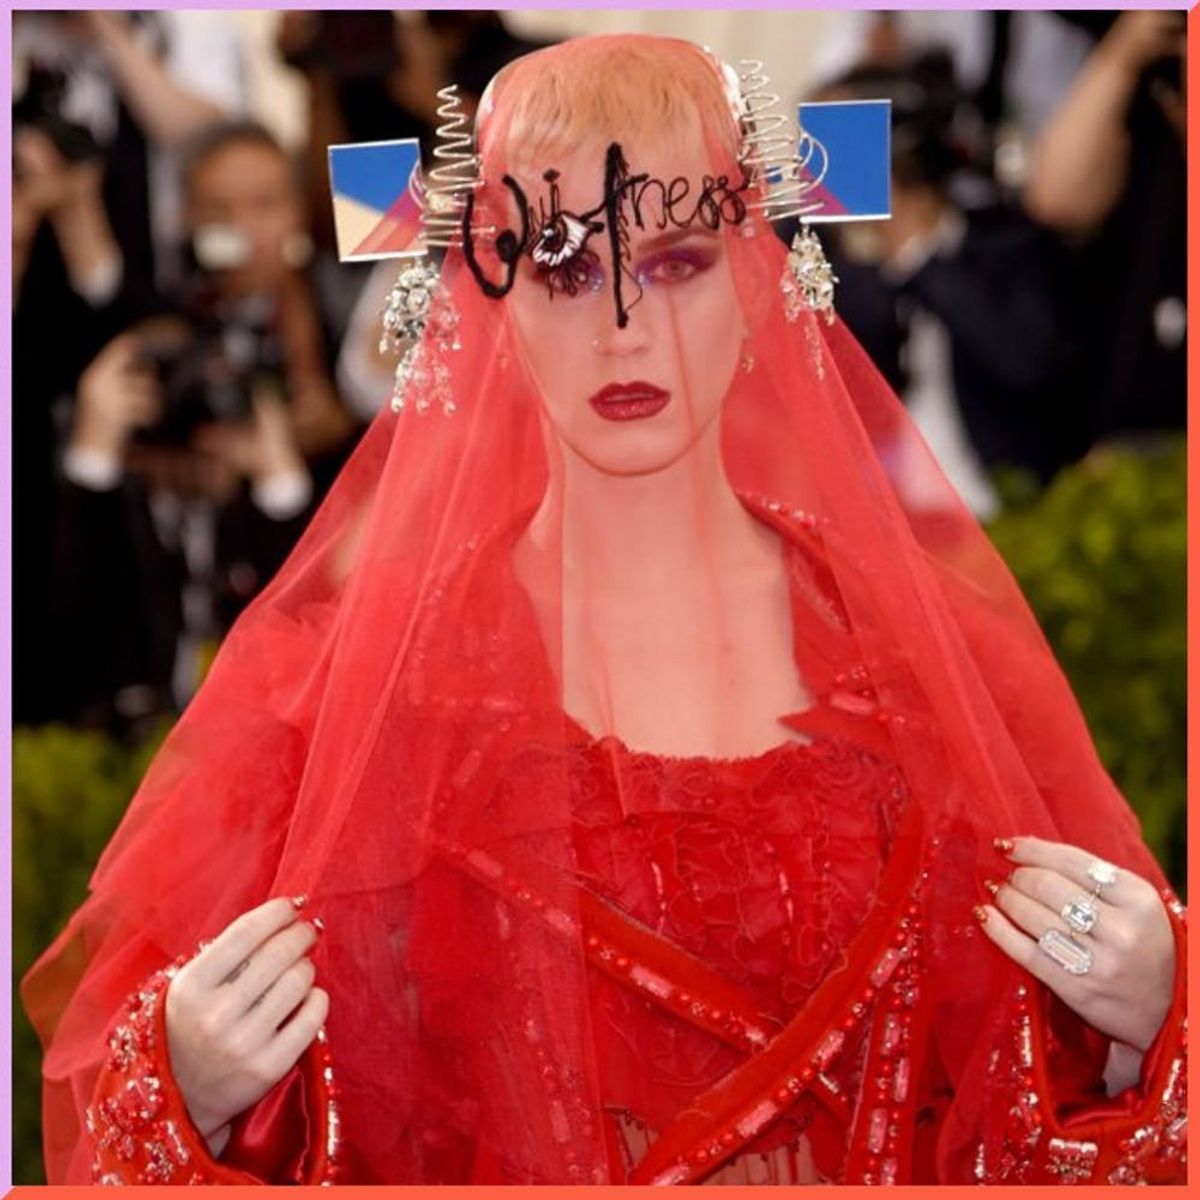 Met Gala 2017: All the Celebs We Could Barely Recognize